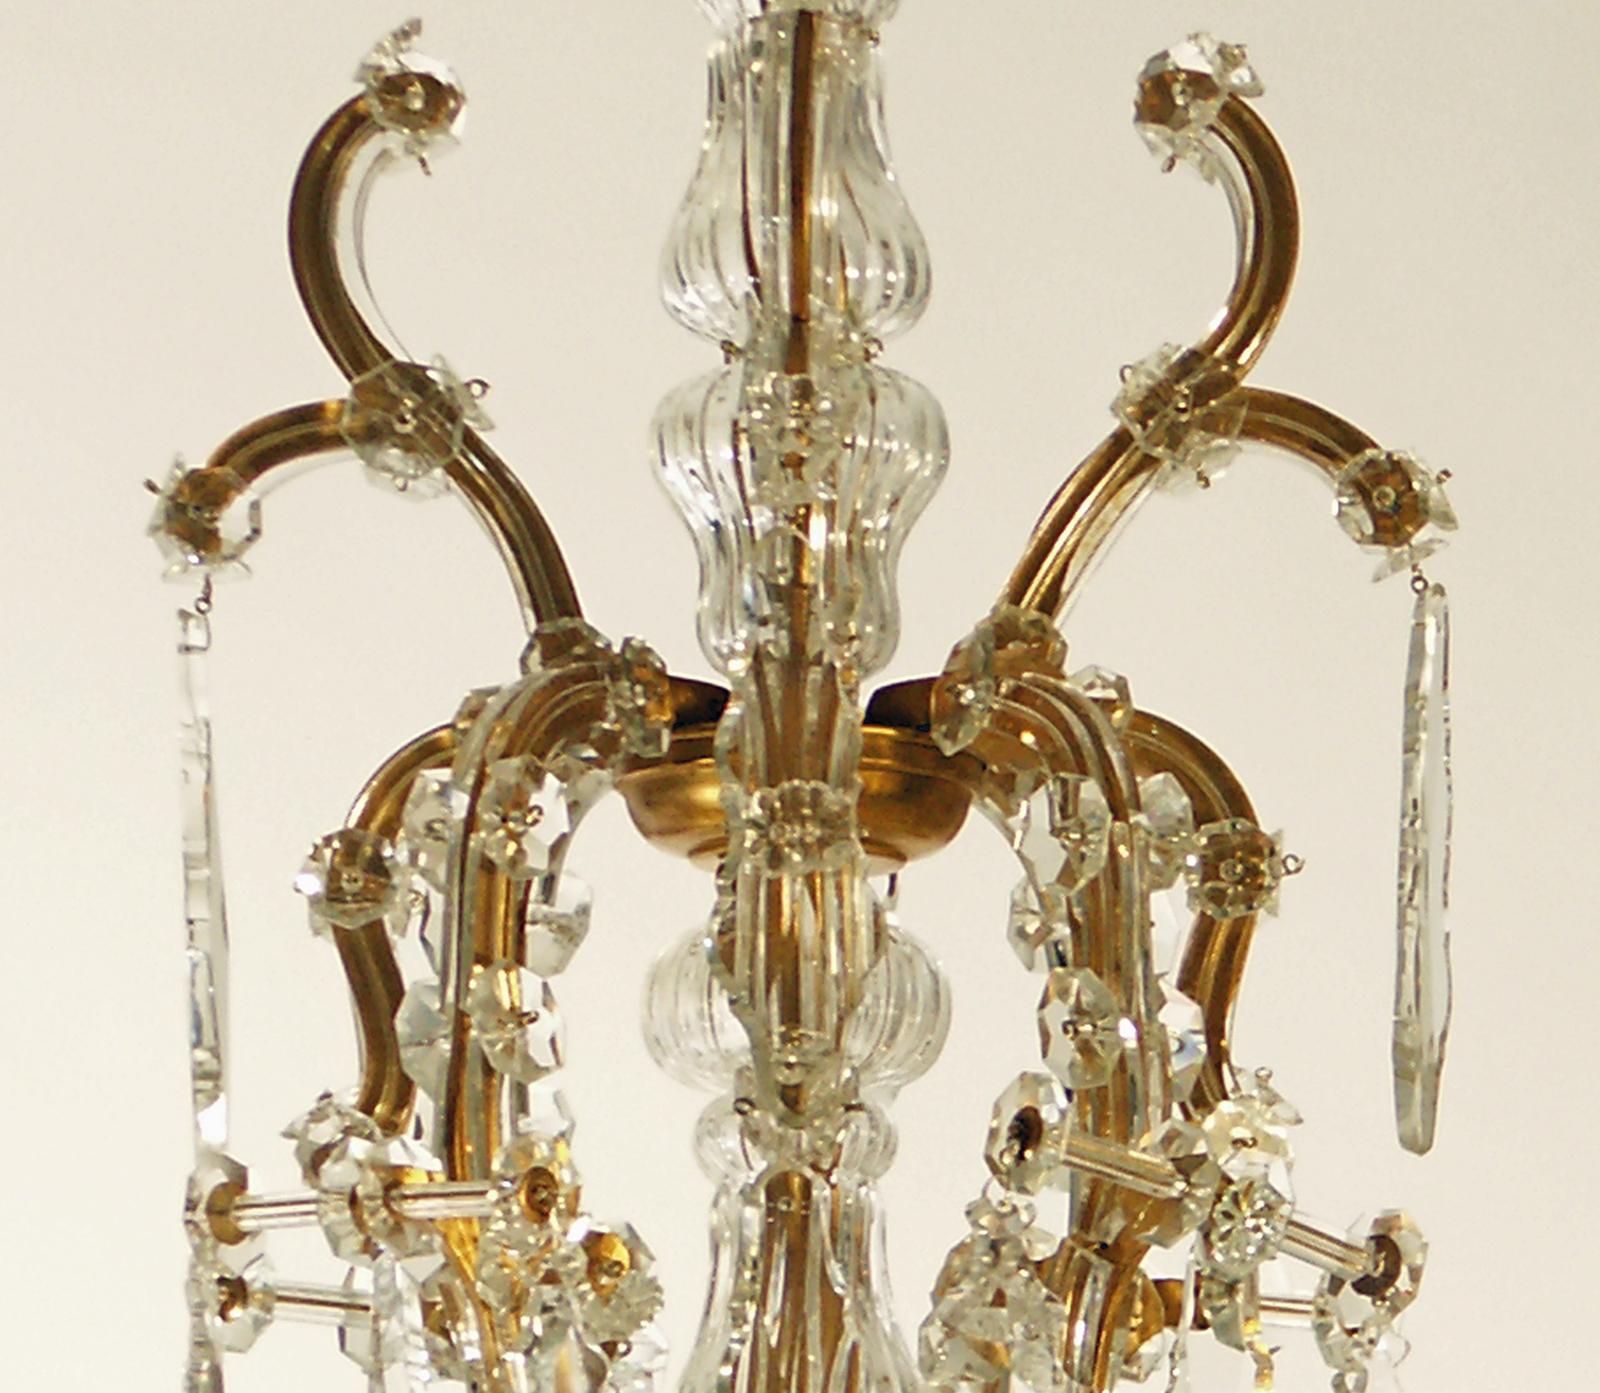 Original Lobmeyr, Maria-Theresia Parlor Chandelier, circa 1920 In Excellent Condition For Sale In Vienna, AT